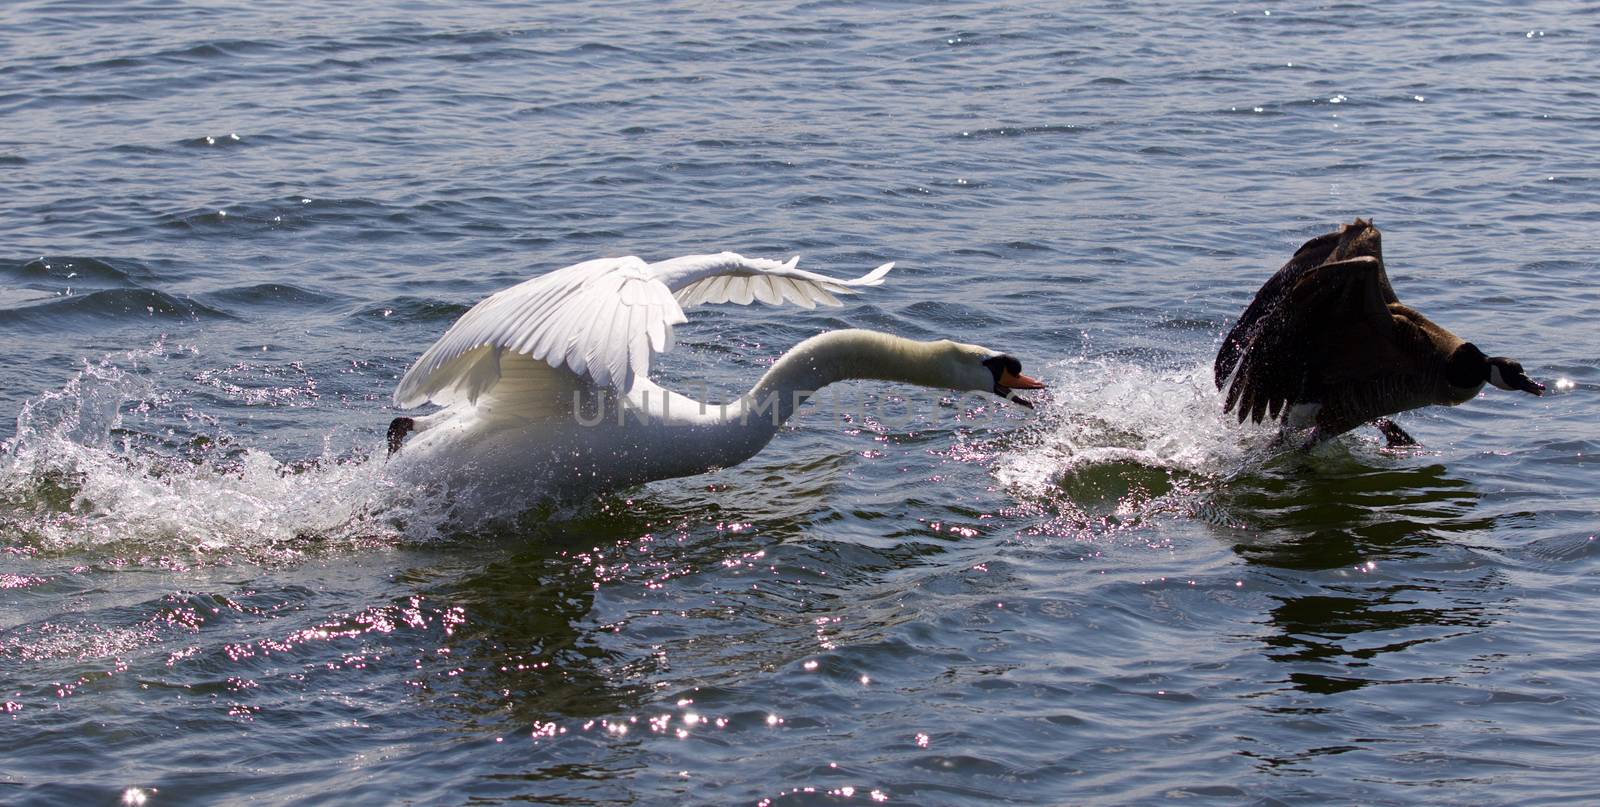 Amazing photo of the angry swan attacking the Canada goose